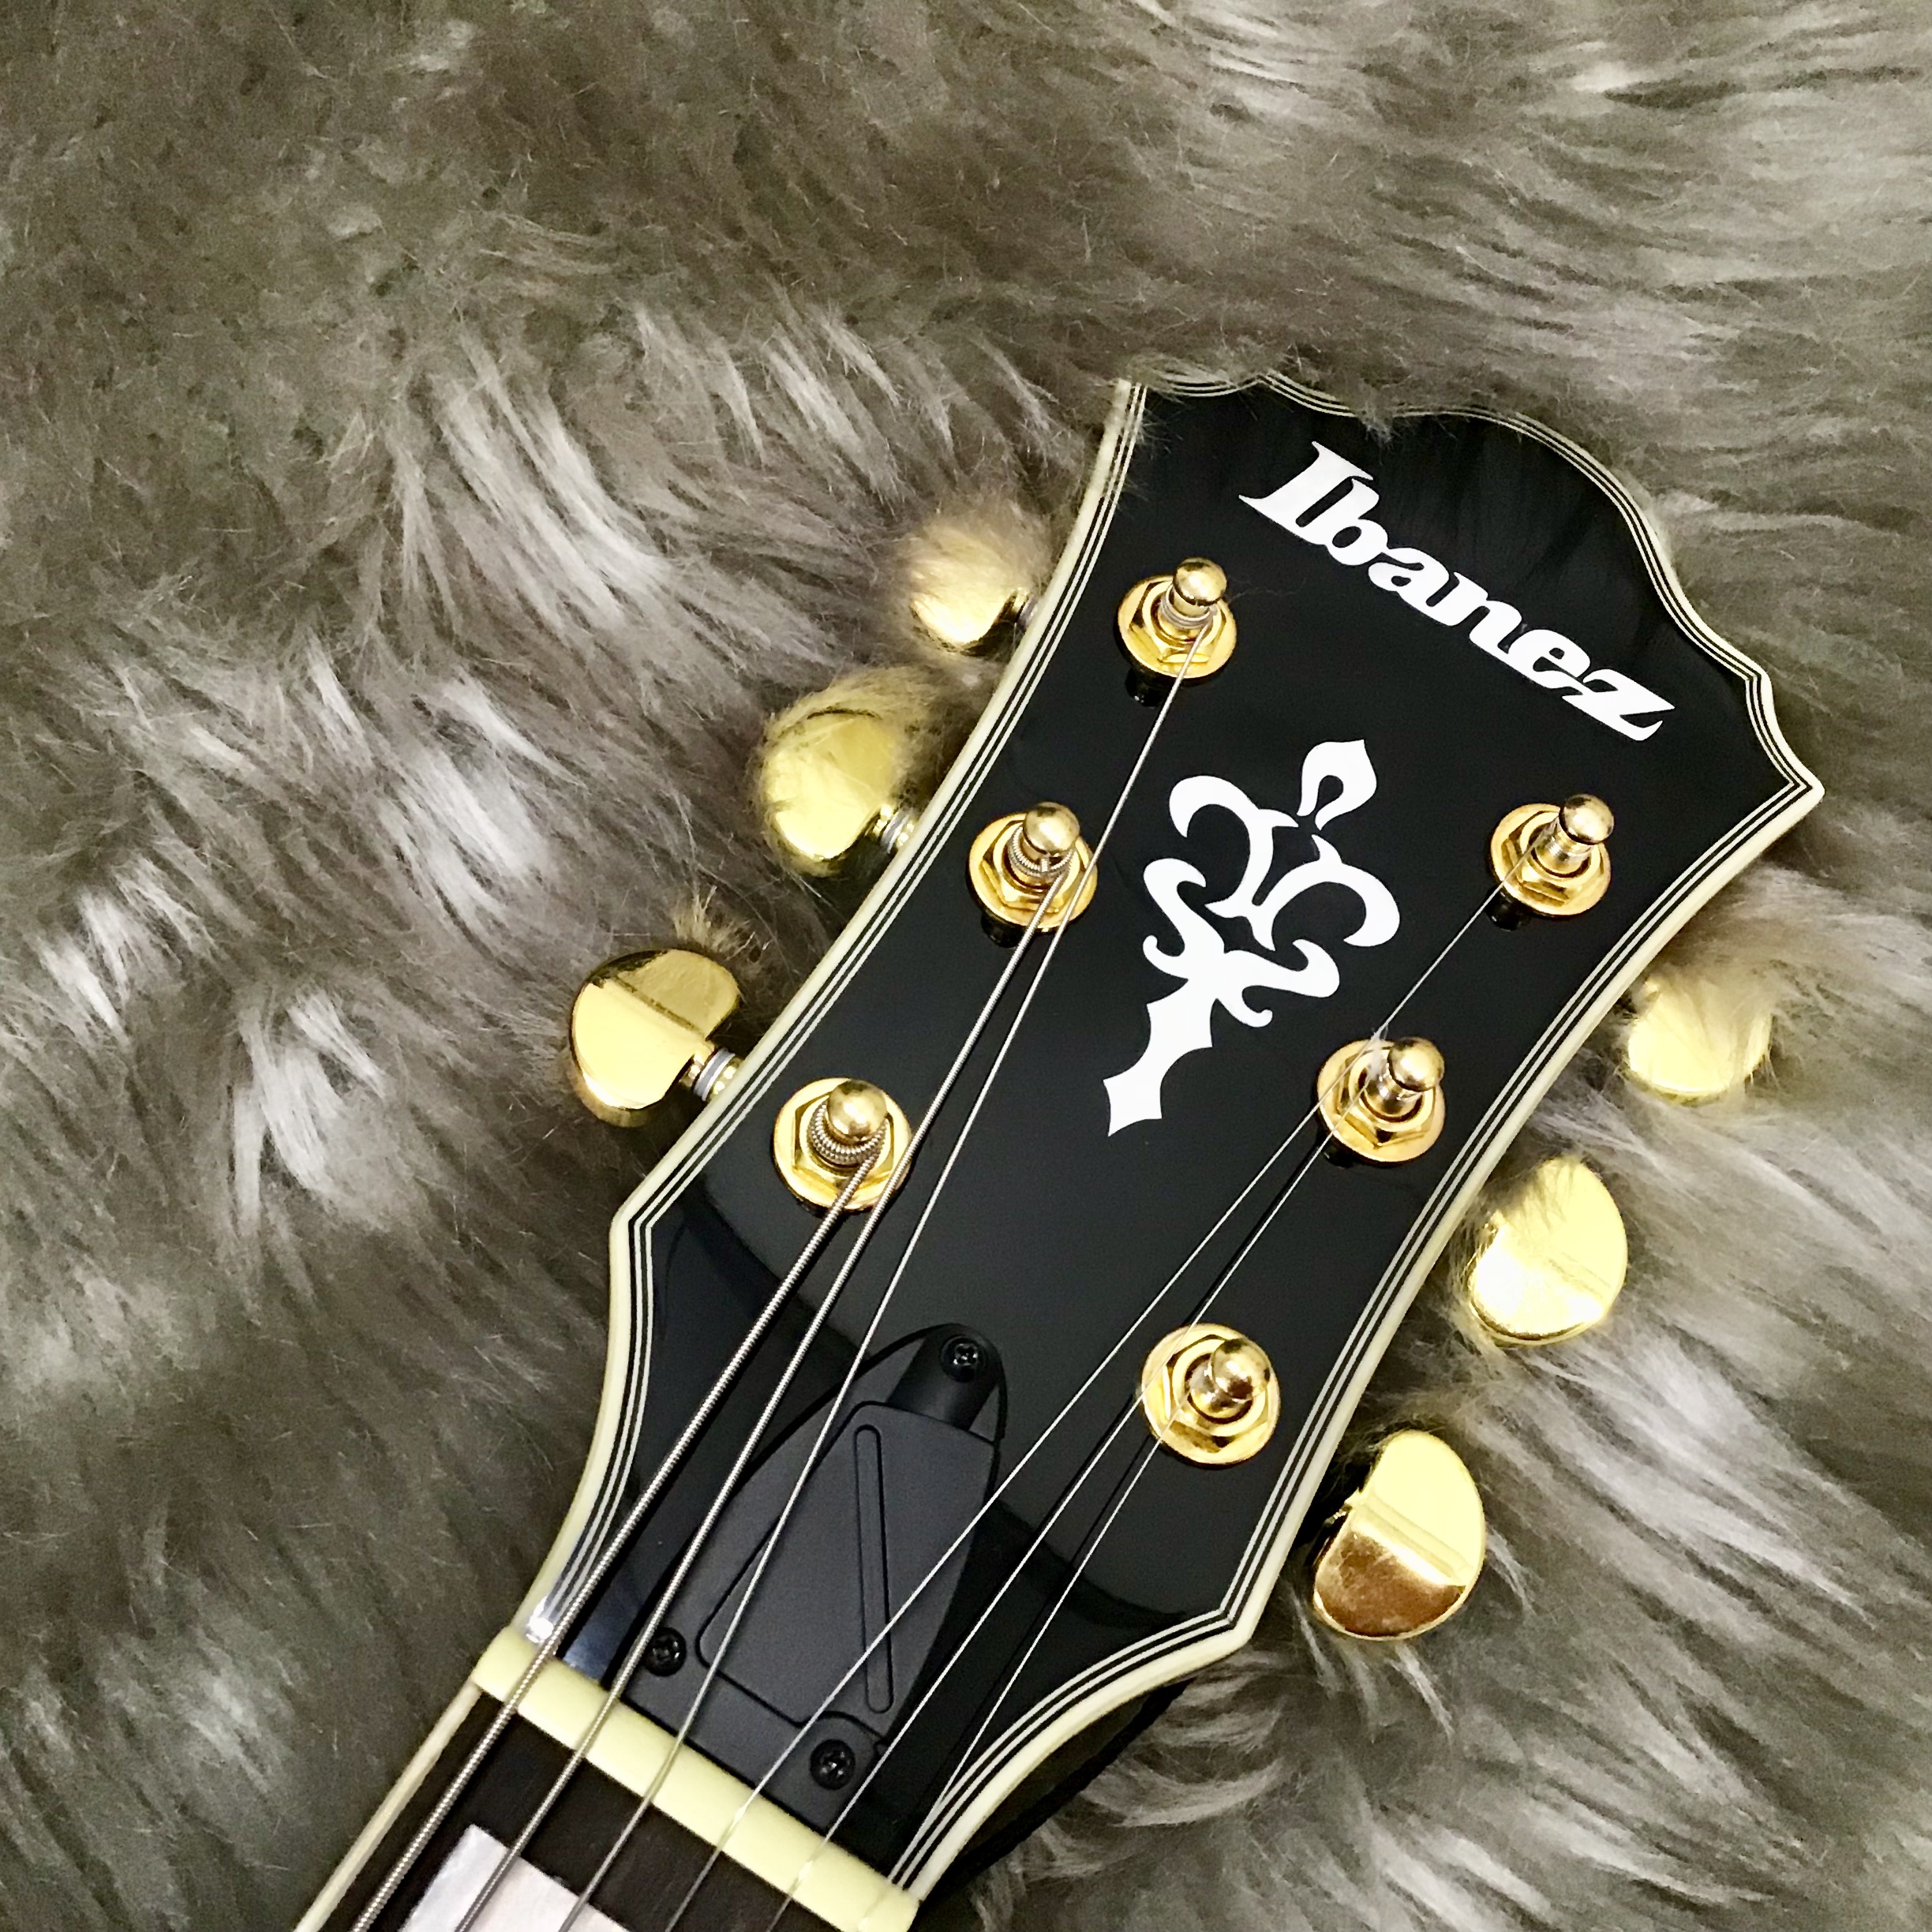 Maxtone guitar pillow ギターピロー